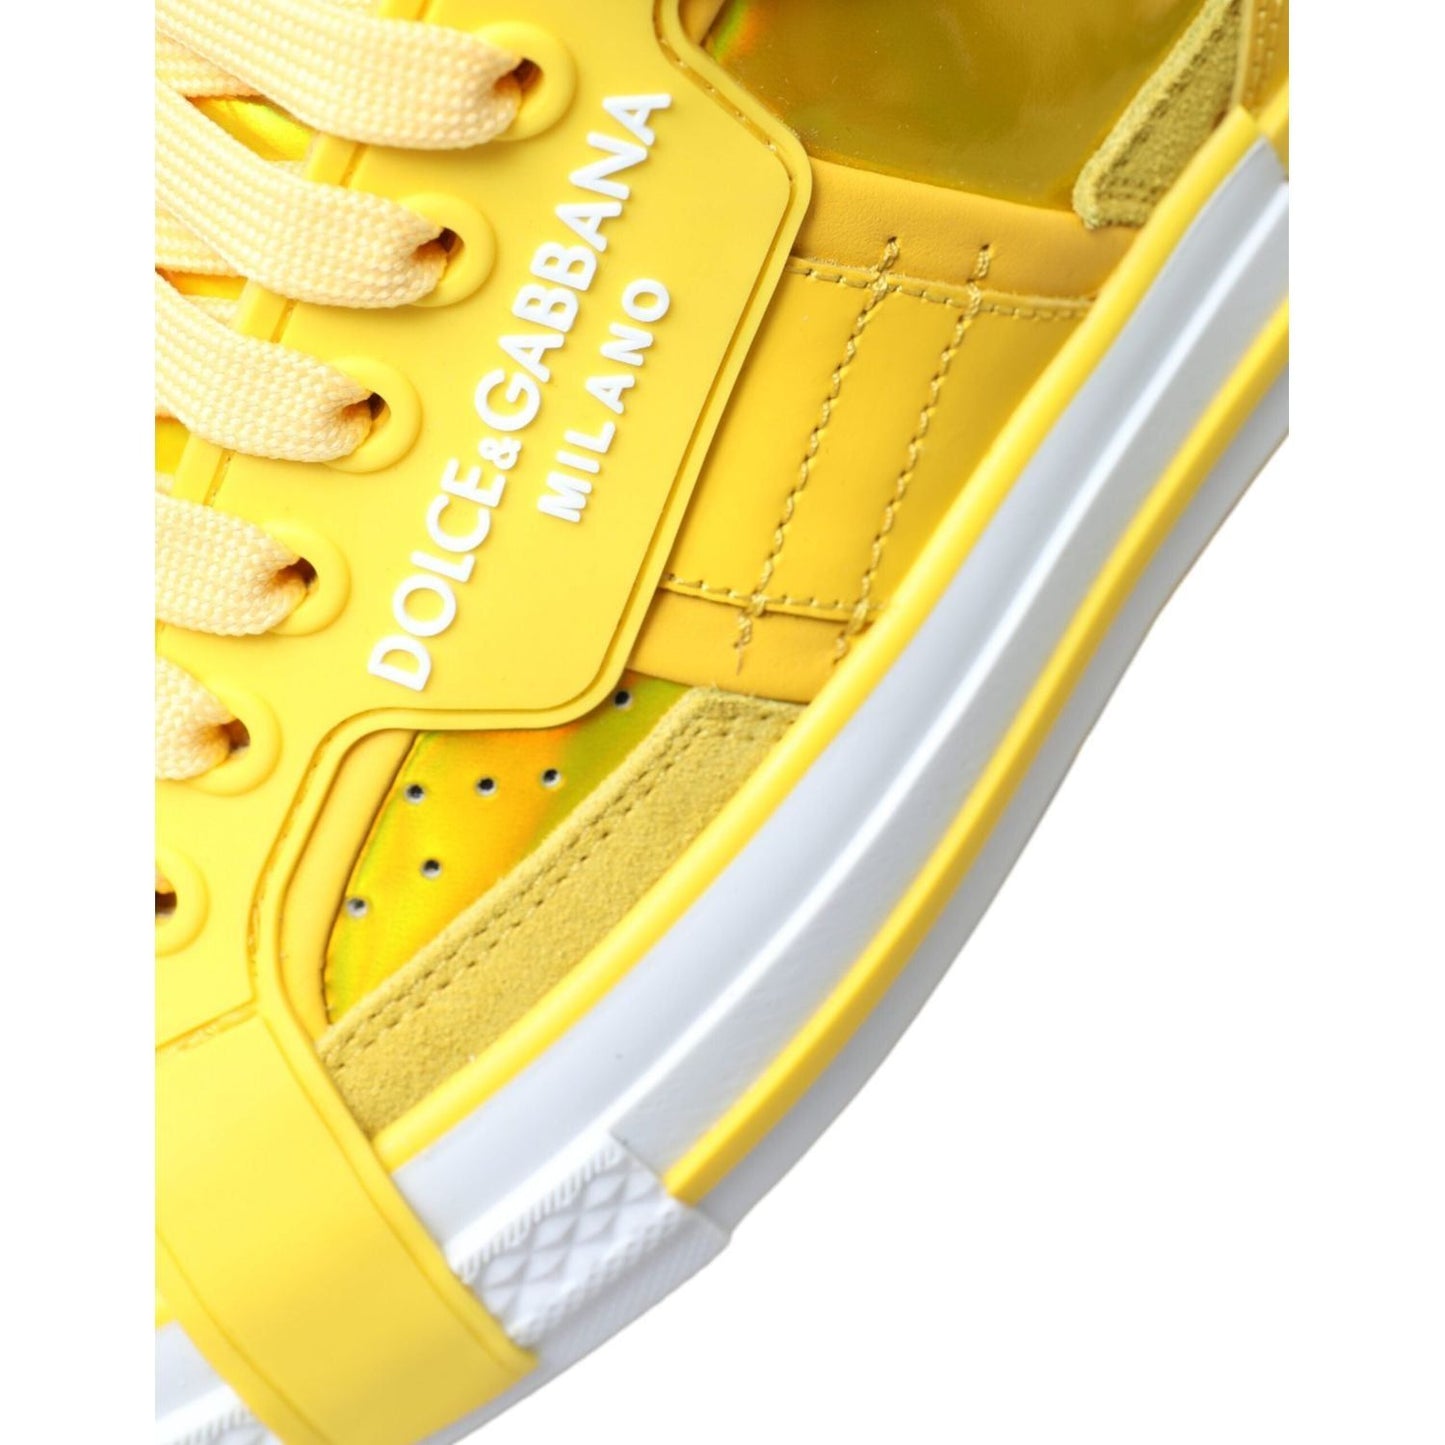 Dolce & Gabbana Chic High-Top Color-Block Sneakers yellow-white-leather-high-top-sneakers-shoes 465A2114-BG-scaled-999443a8-a06.jpg